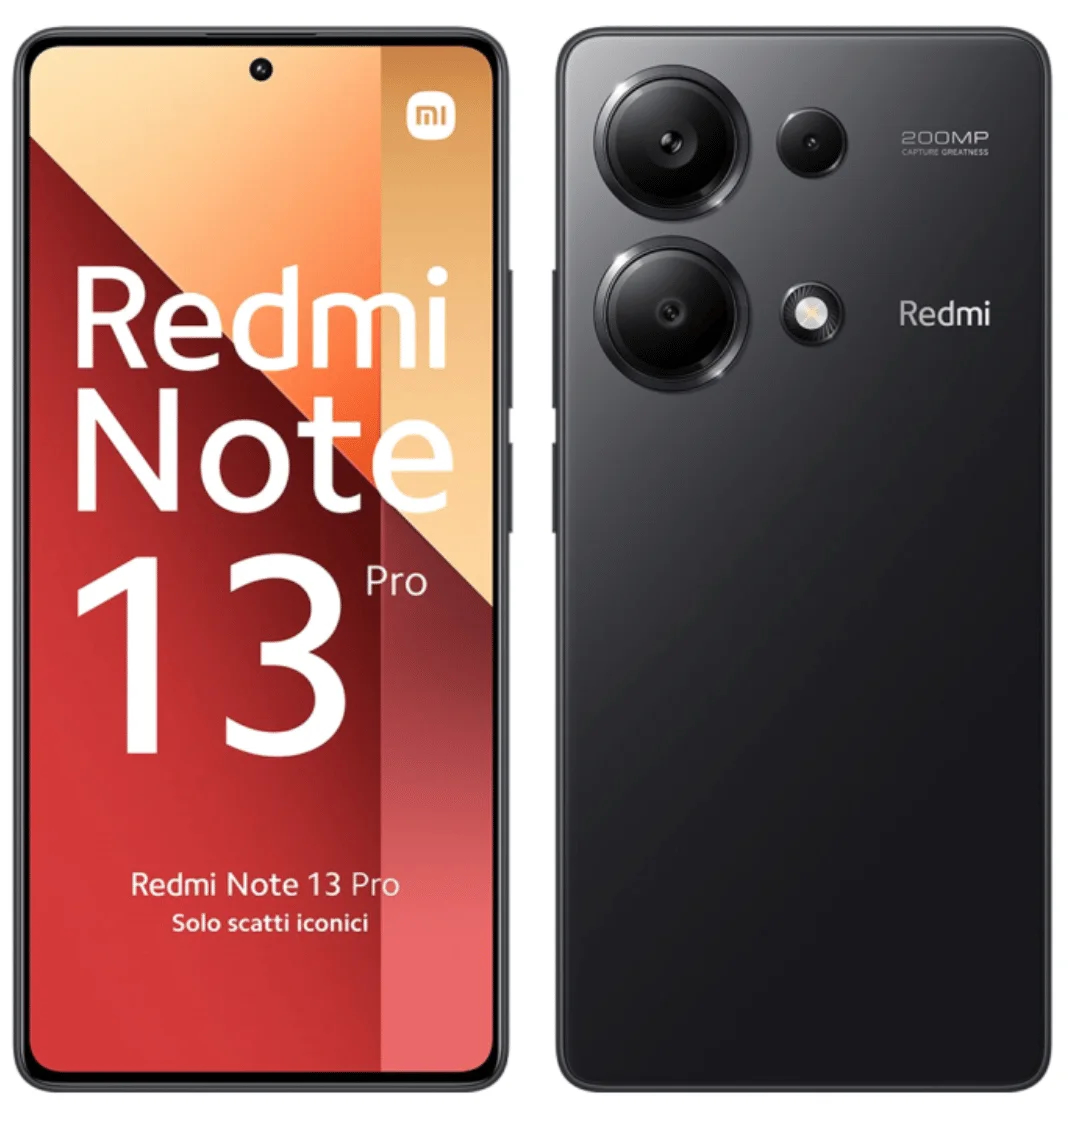 Xiaomi Redmi Note 13 Pro Plus launching for as little as €449 in Europe -   News